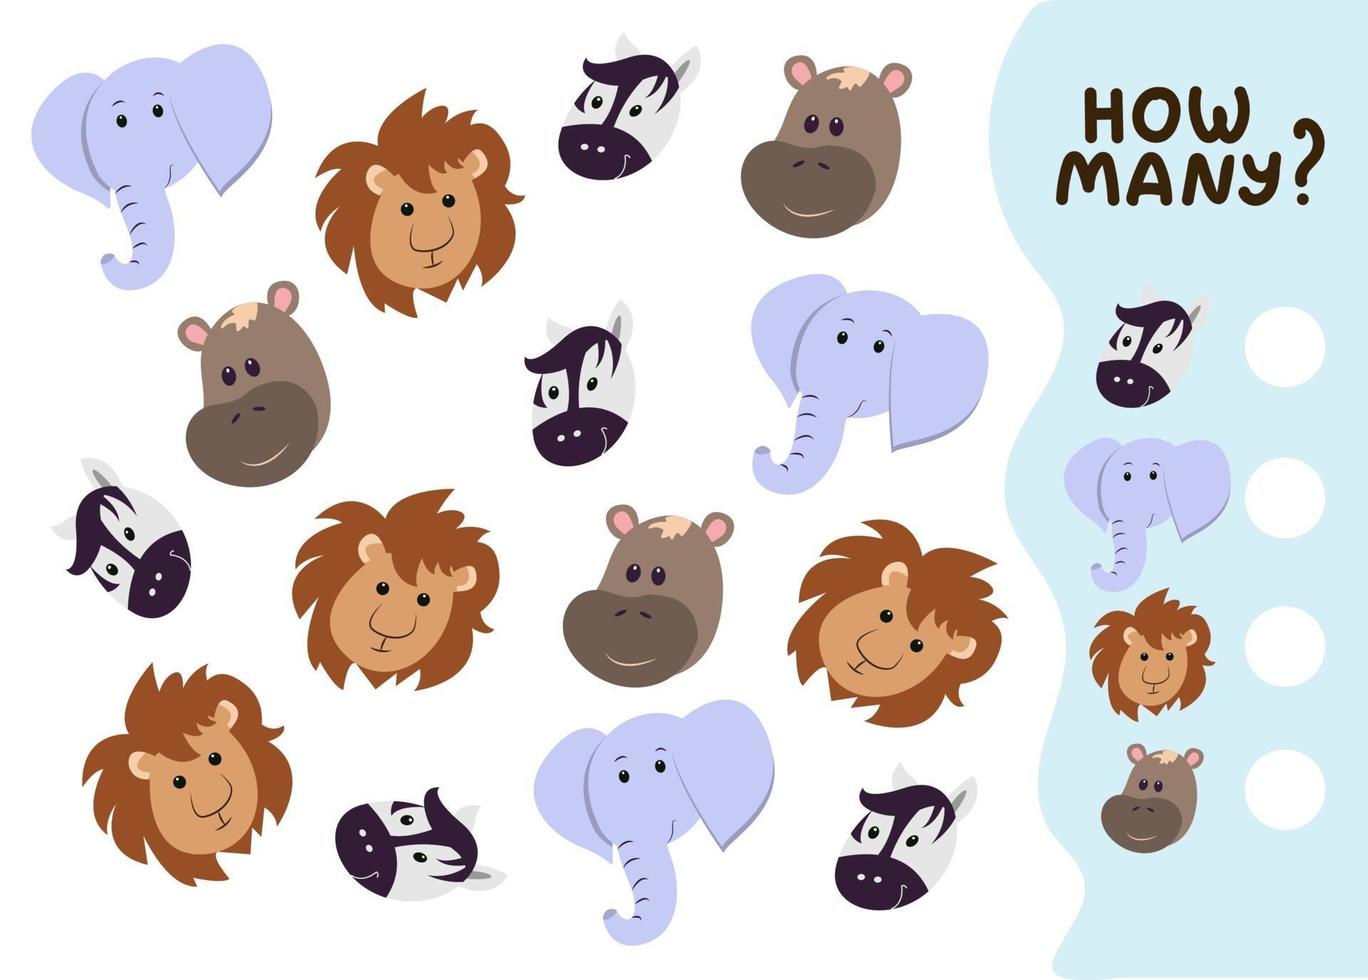 Counting game for preschool kids. Educational math game. Count how many wild animals there are and write down the result. Vector illustration in cartoon style